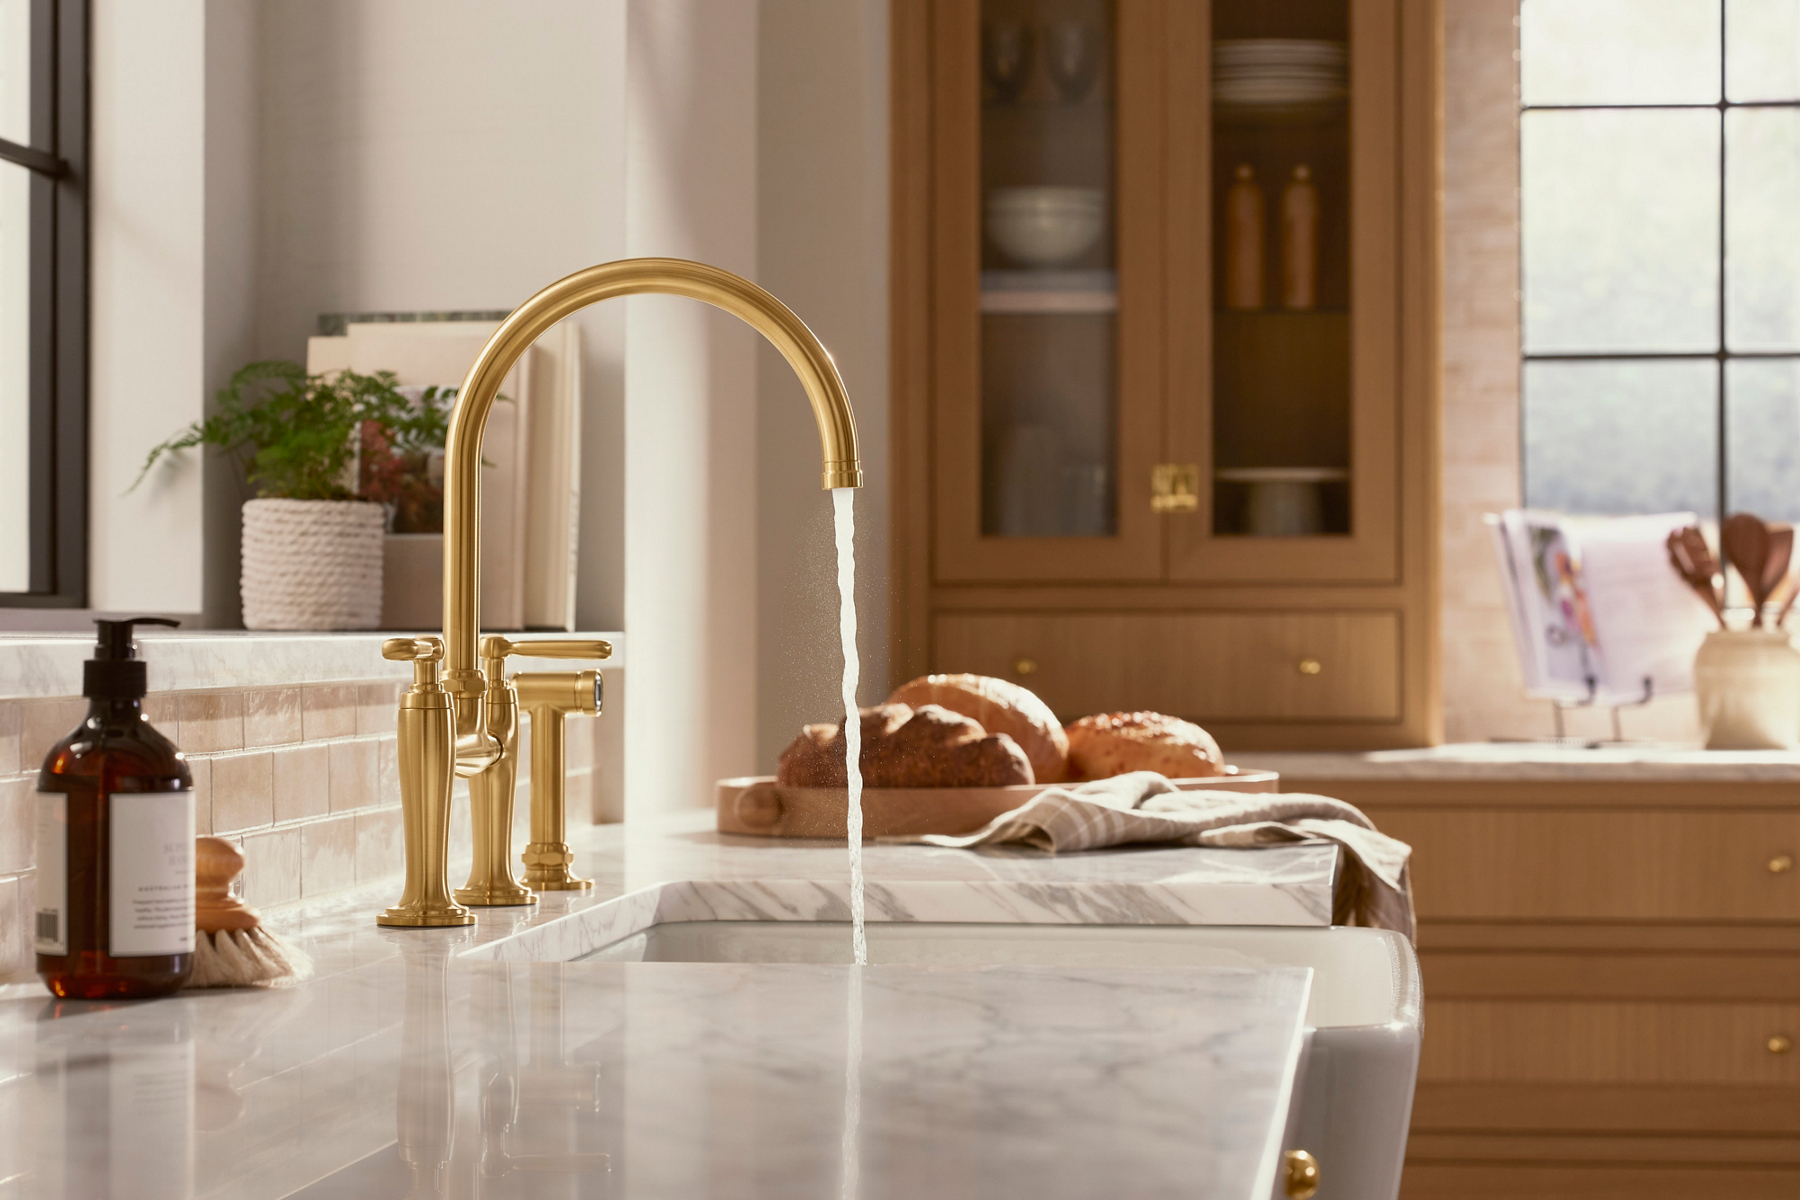 A bridge style faucet with brass finish installed in a kitchen with the water turned on.